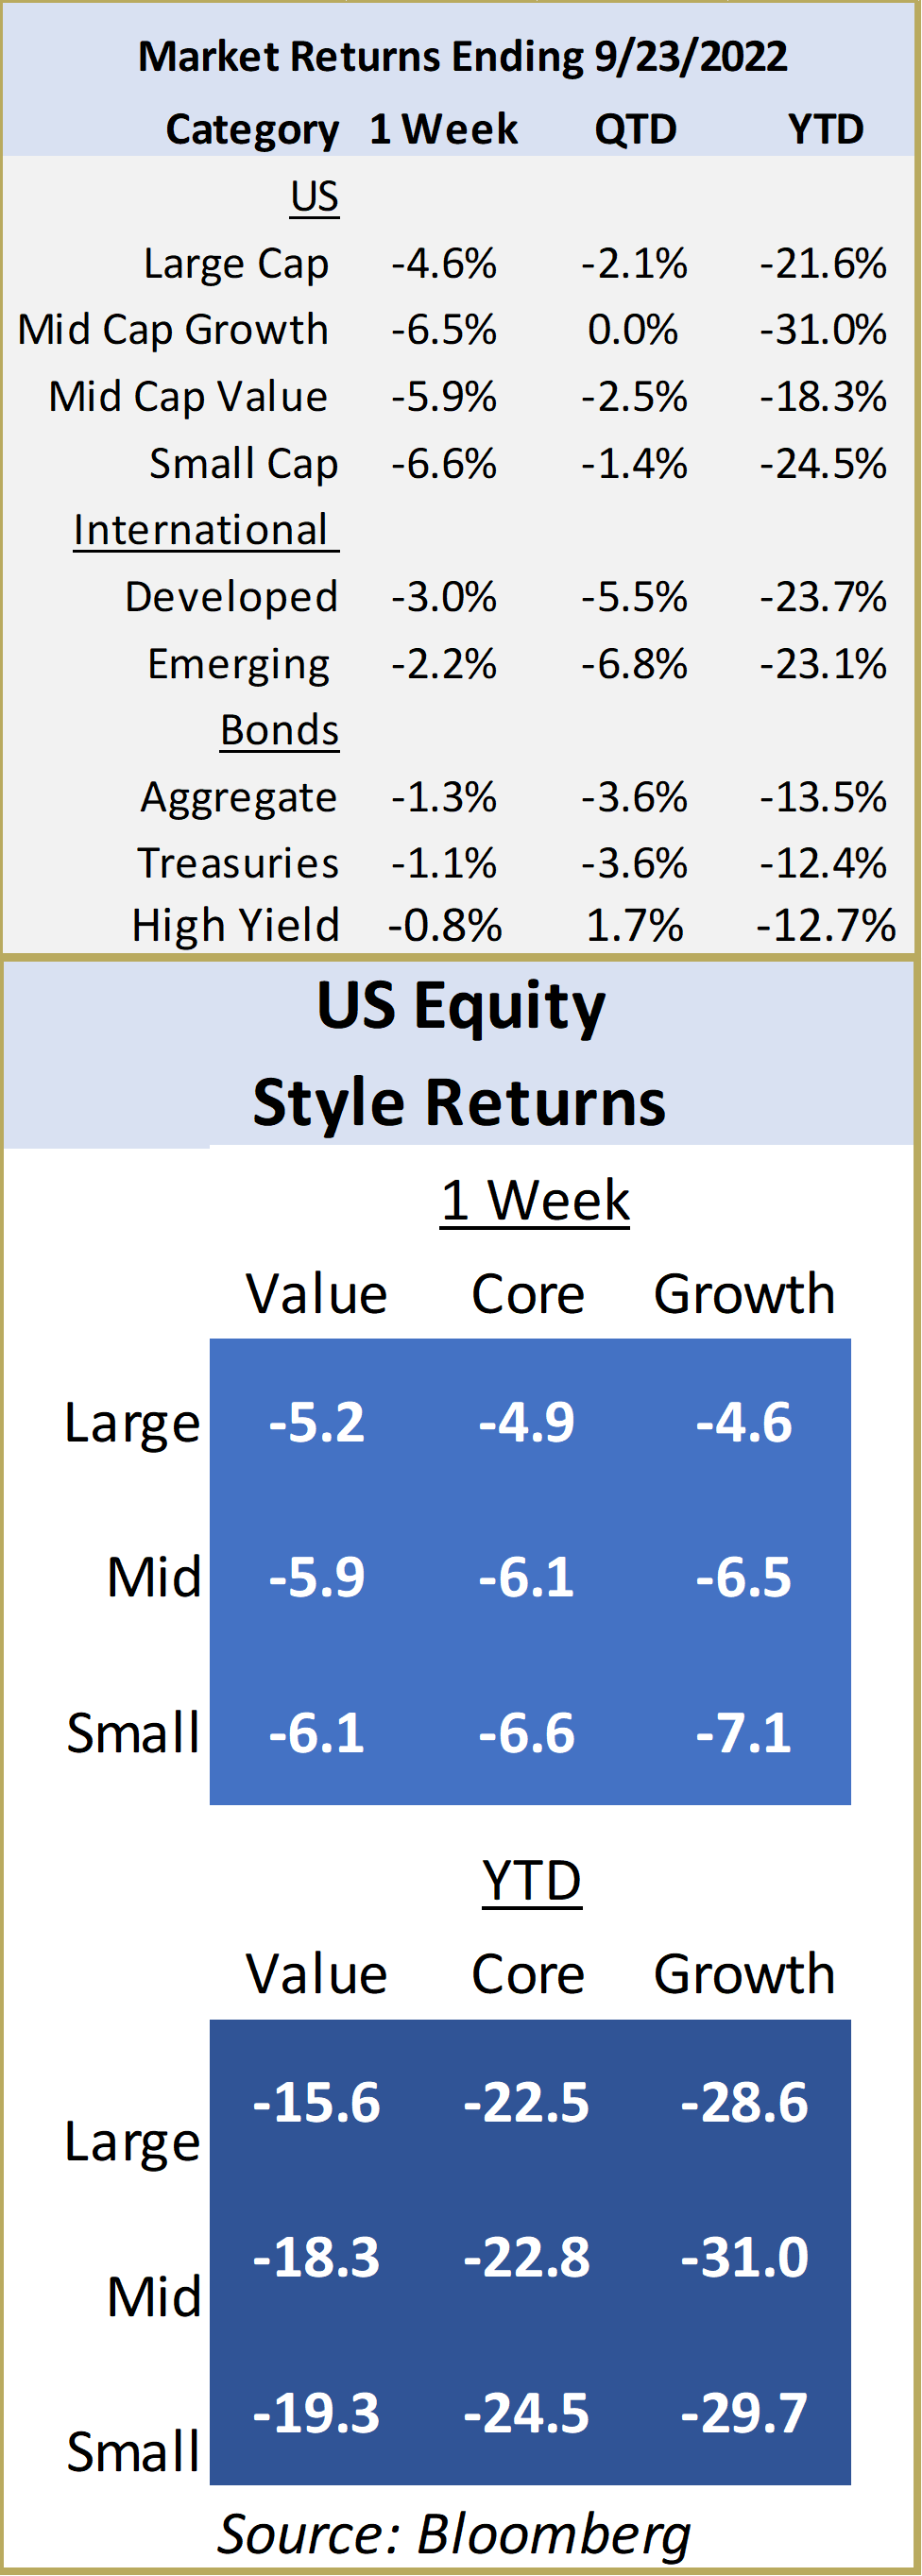 Market Returns Ending 9-23-2022 and US Equity Style Returns